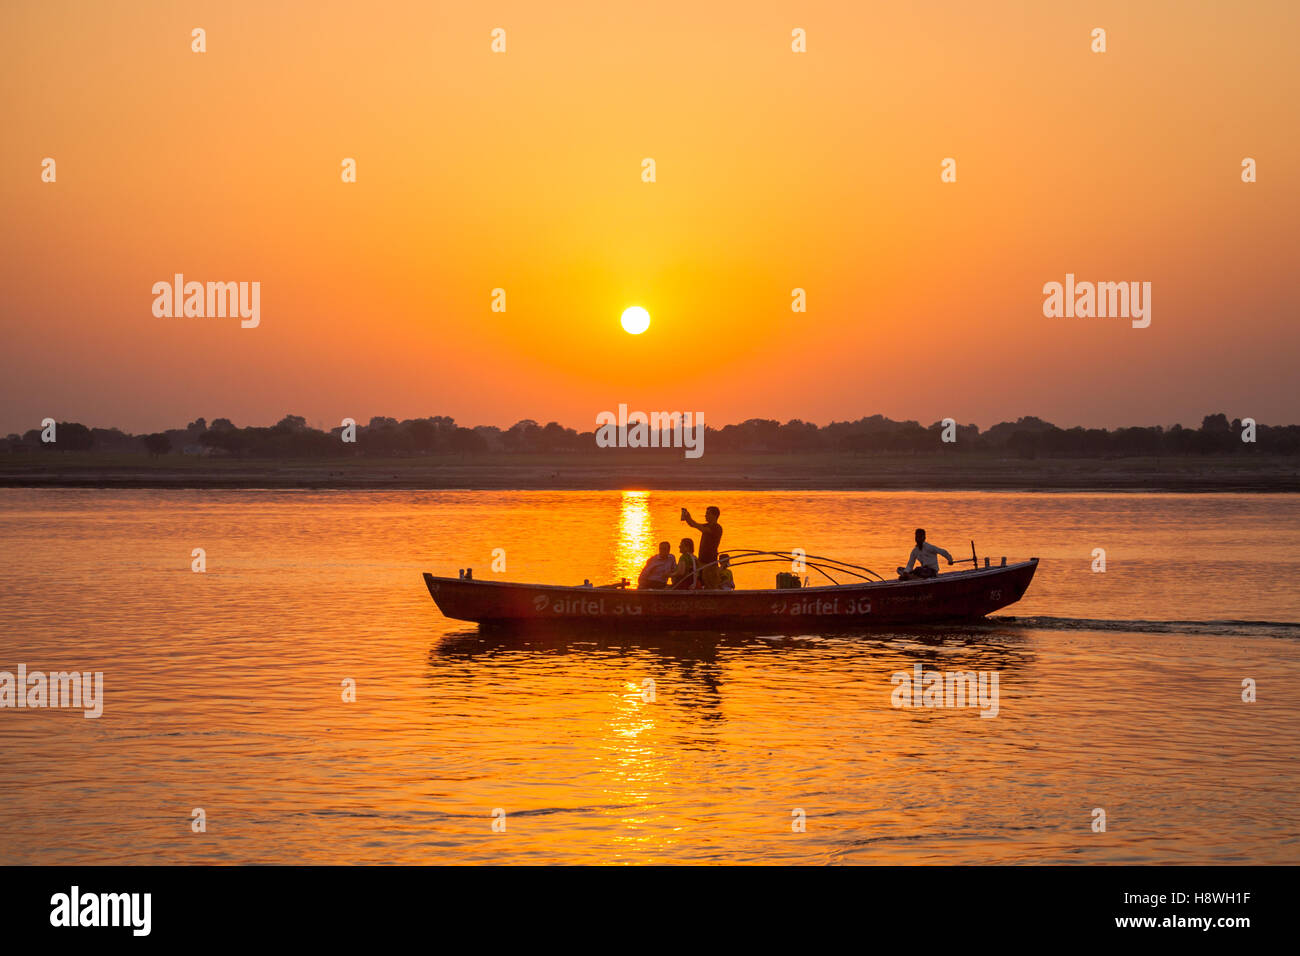 Boat pictured in sunset on the River Ganges, northern India Stock Photo